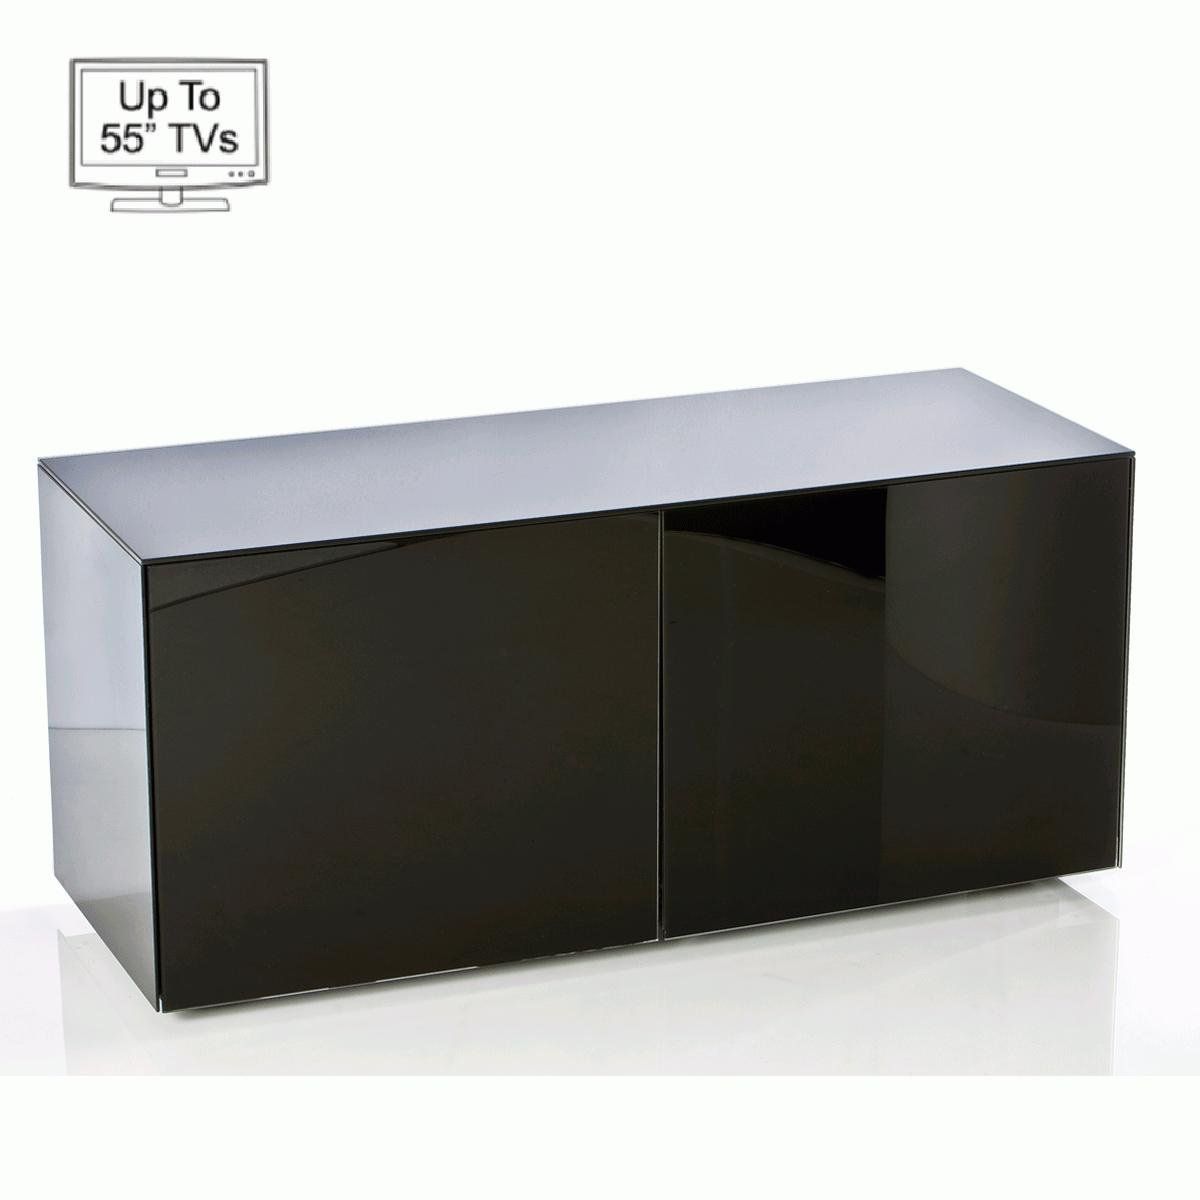 Invictus Black High Gloss Tv Stand For Up To 55" Tvs For Tv Cabinets Black High Gloss (View 6 of 15)